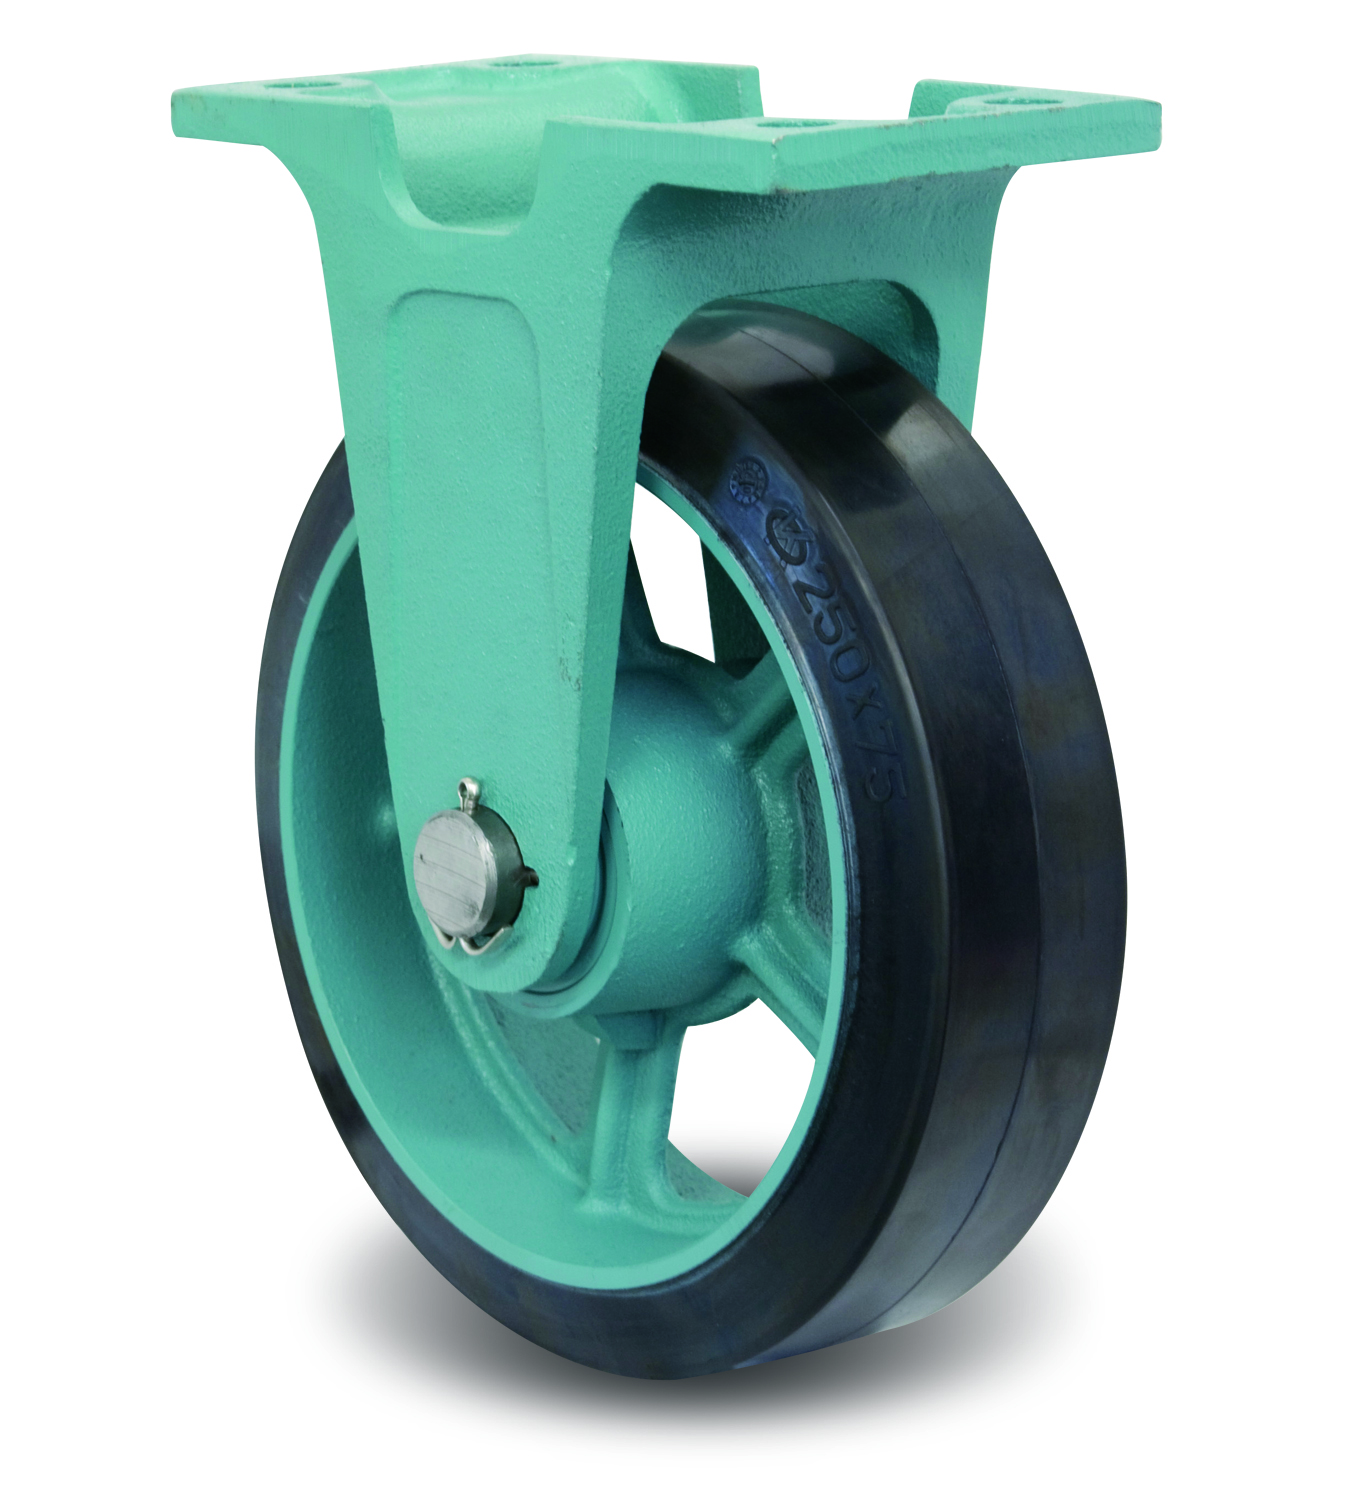 Ductile Caster Wide Type, Fixed MG-W Metal Fittings, E-MG-W (EMG-W150X65) 